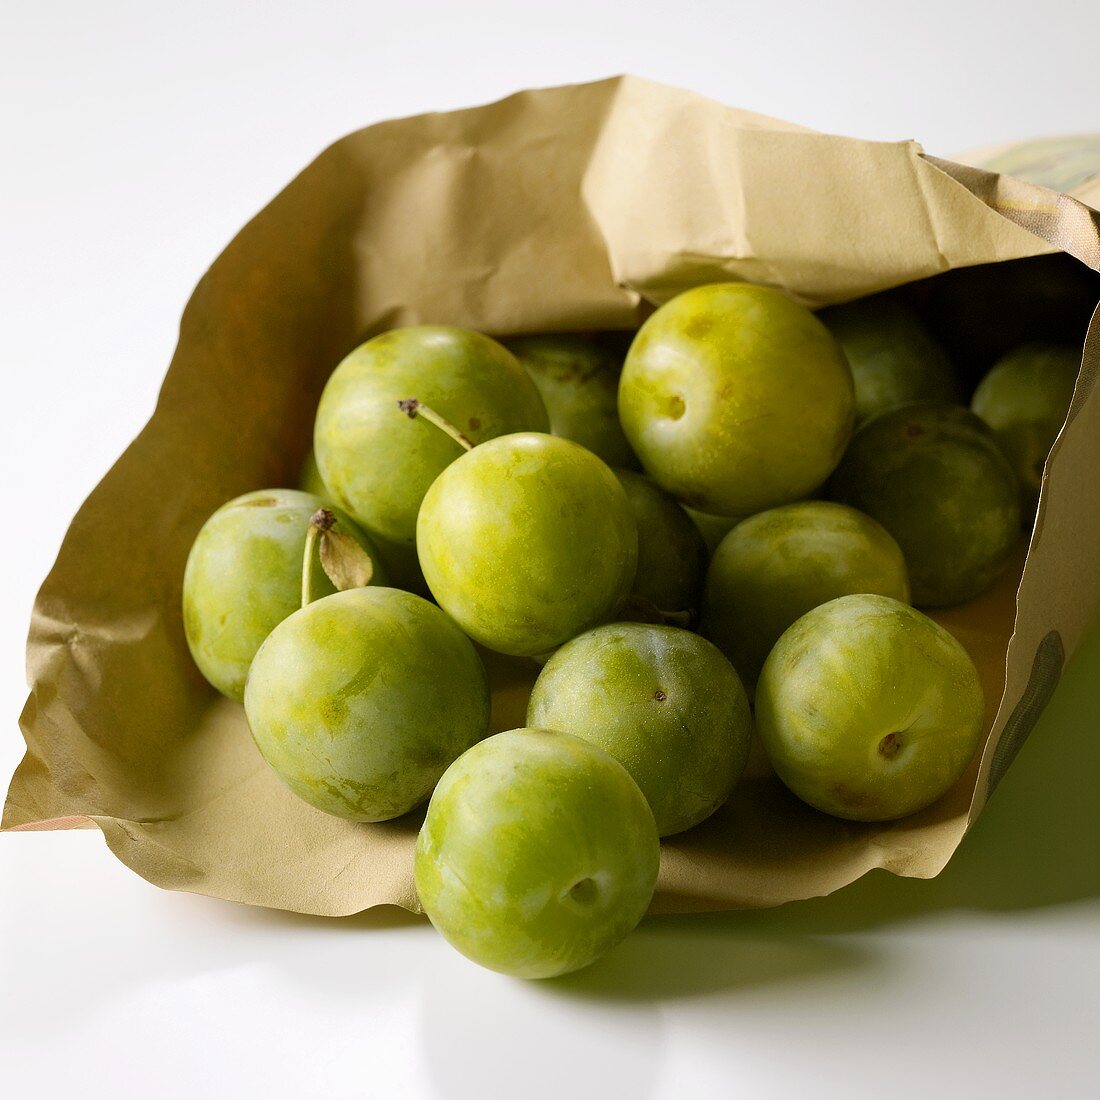 Greengages in a paper bag